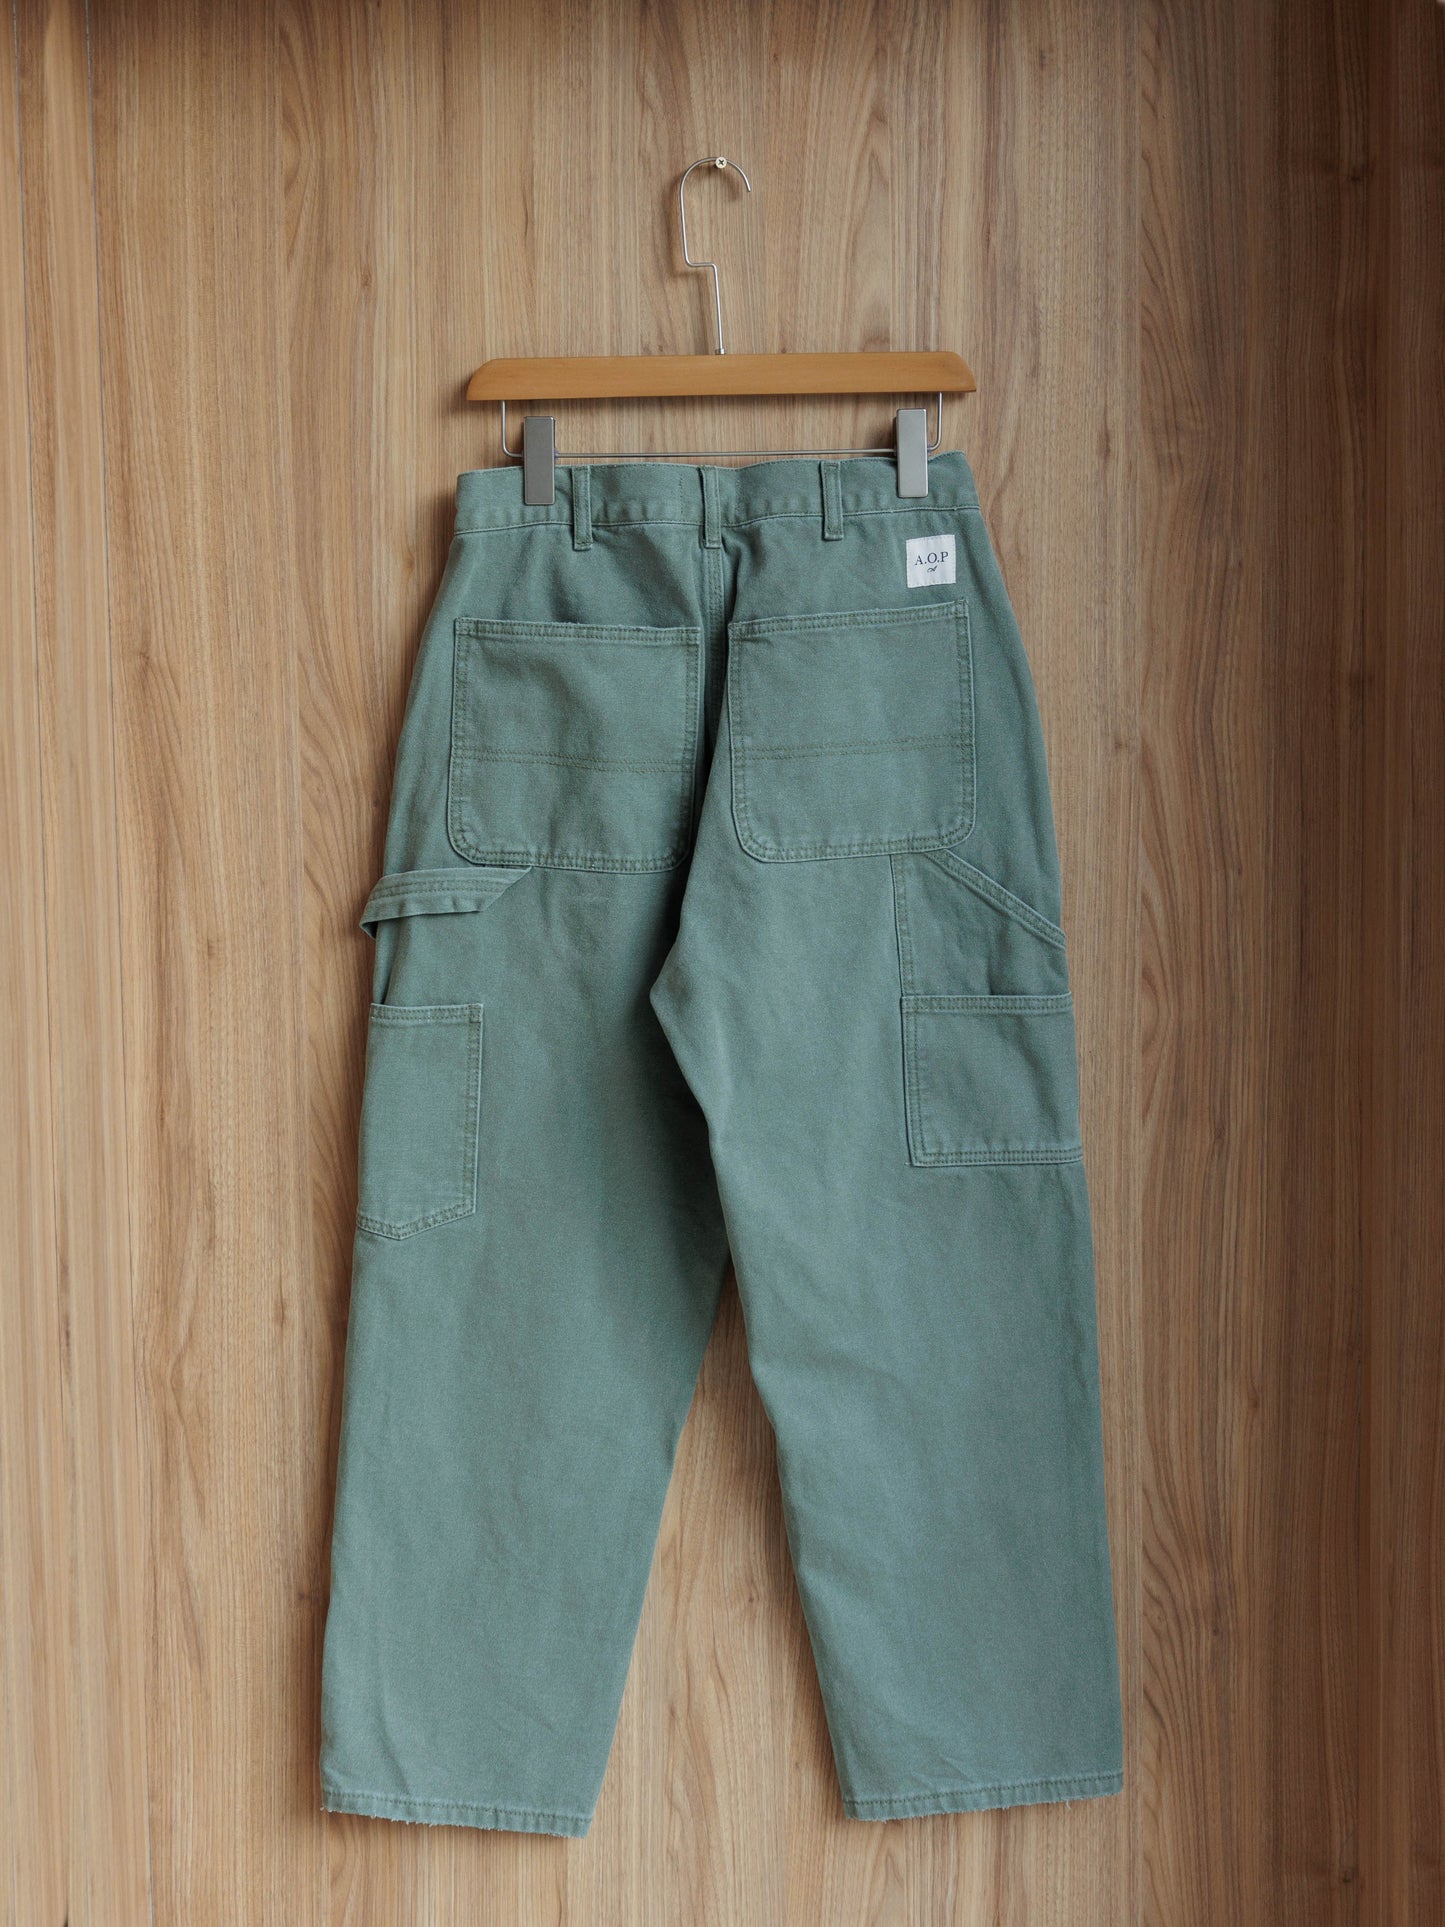 A.O.P Vintage Washed Work Pants